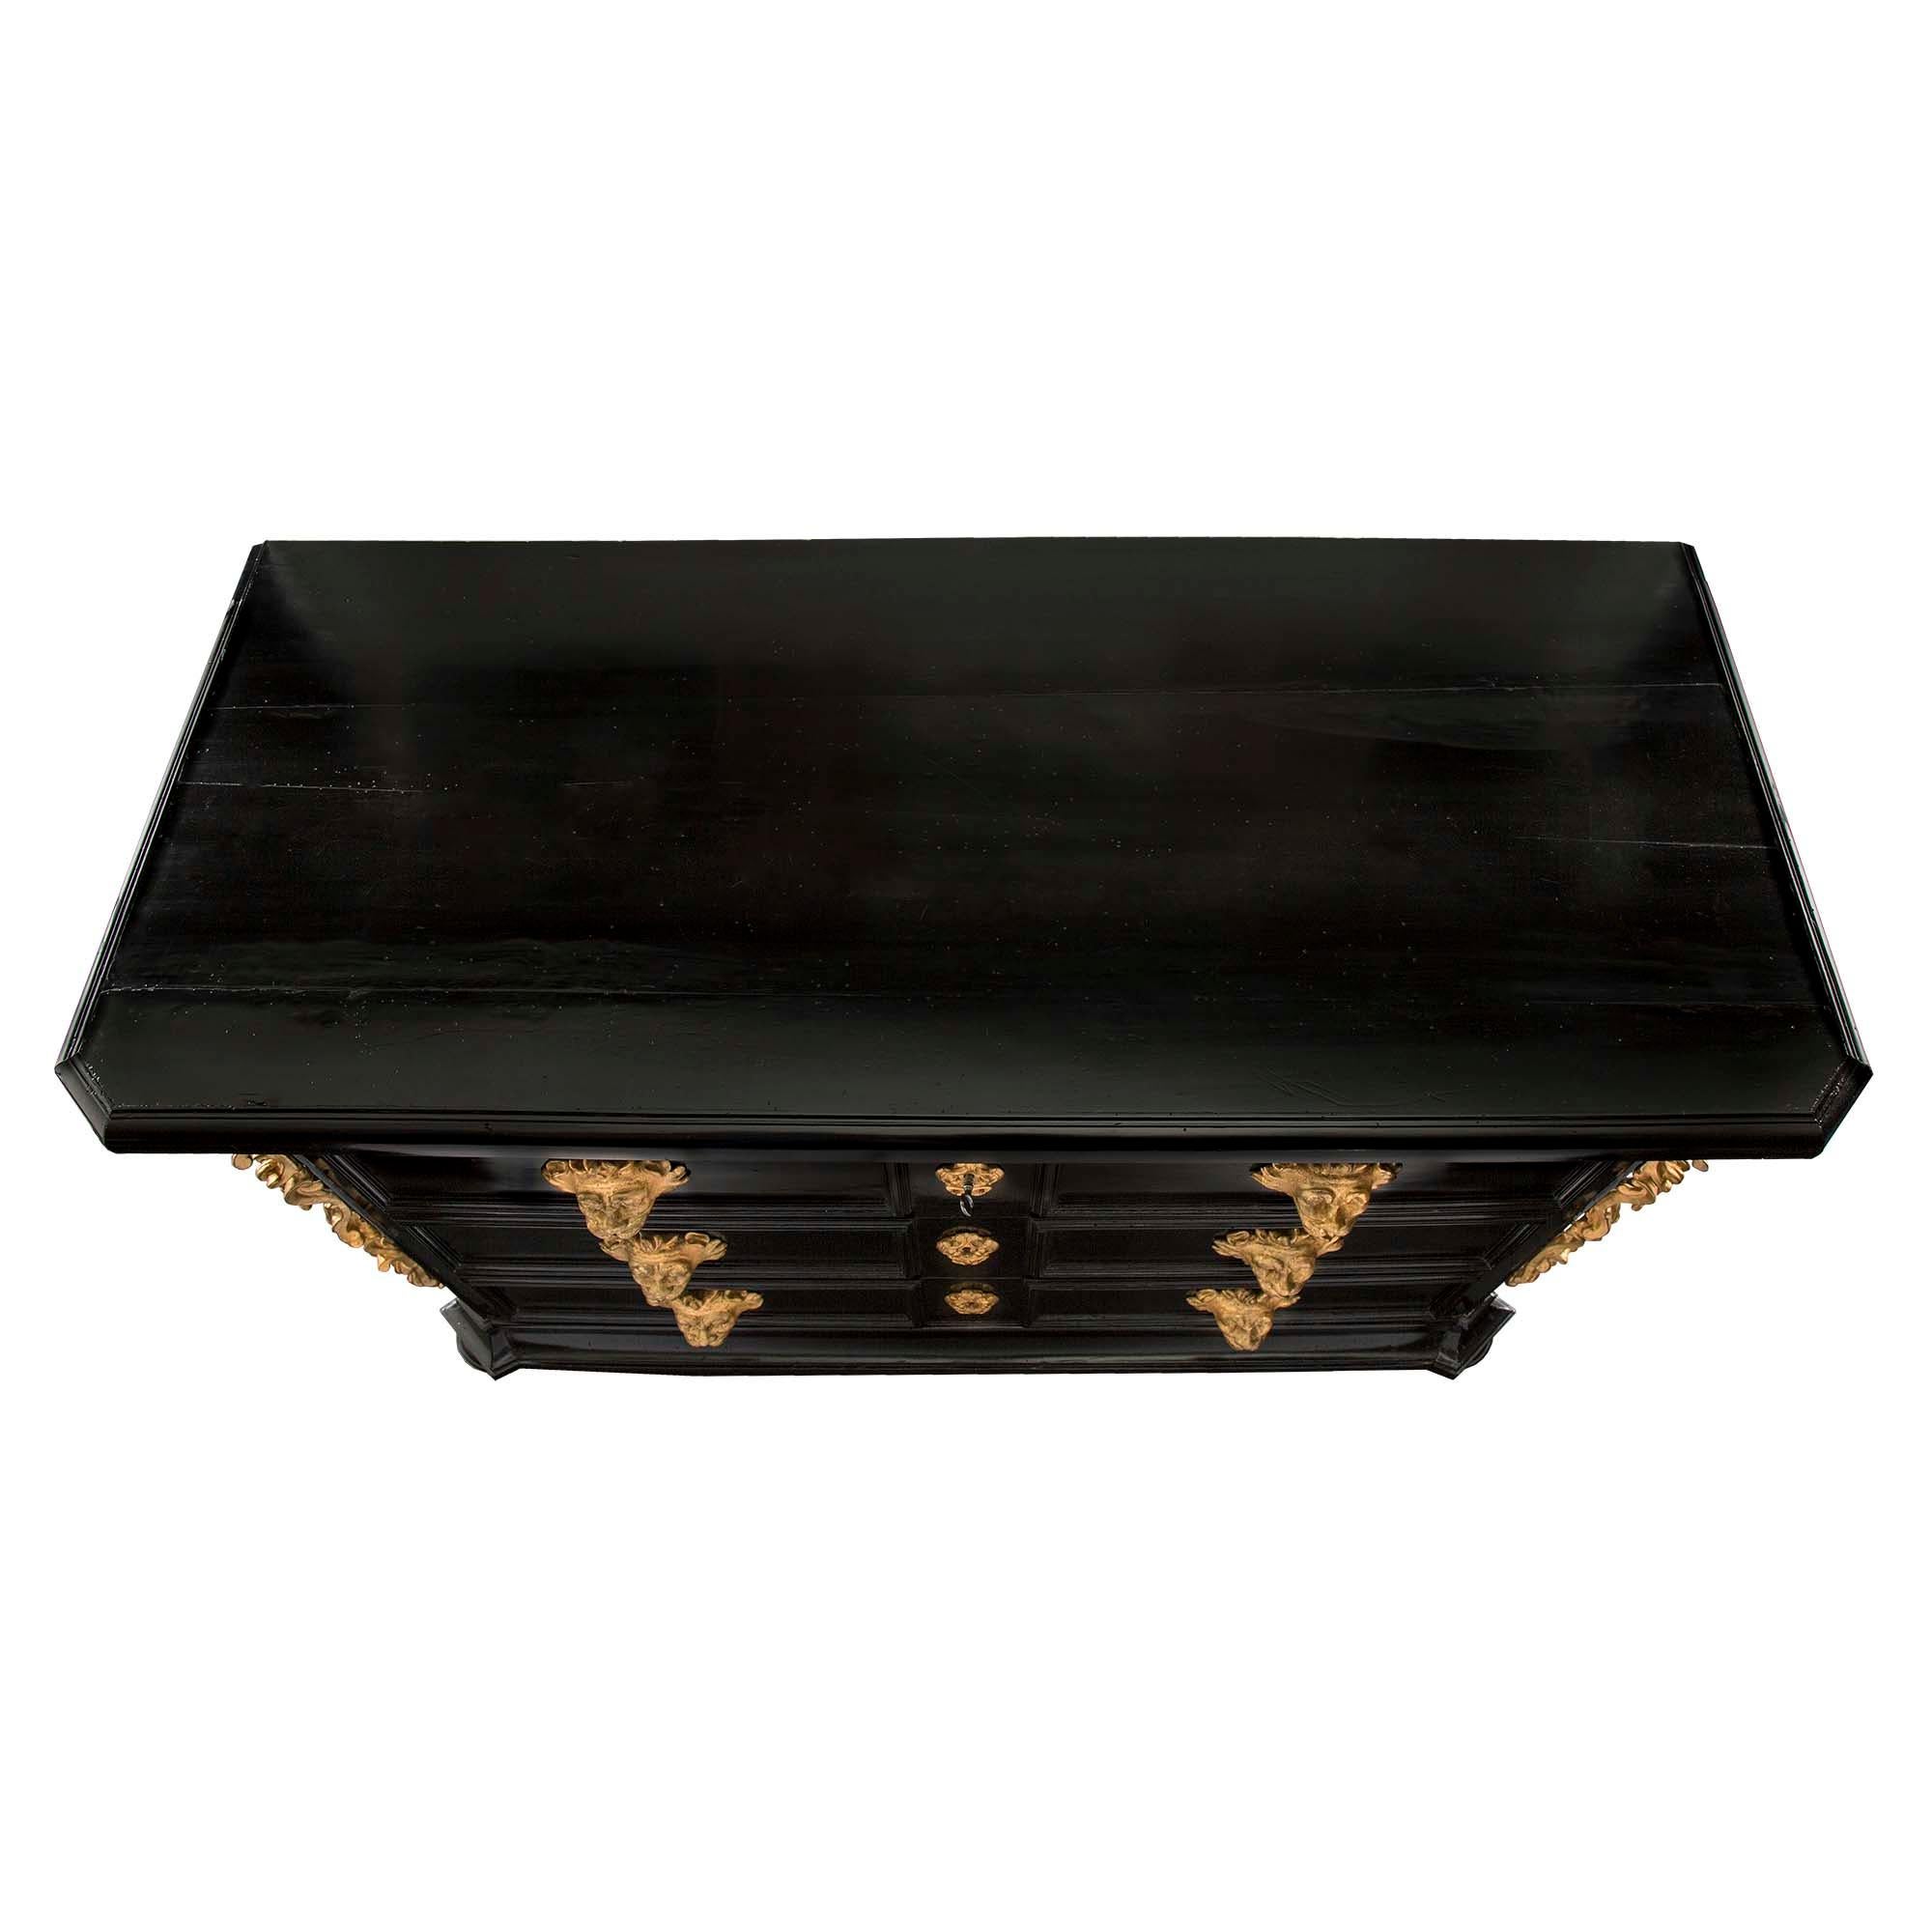 A most handsome Italian 17th century Baroque period ebonized fruitwood and giltwood chest, from Florence. The four drawer chest is raised by bun feet below a mottled border. At the center are three wide drawers, decorated with sensational detailed